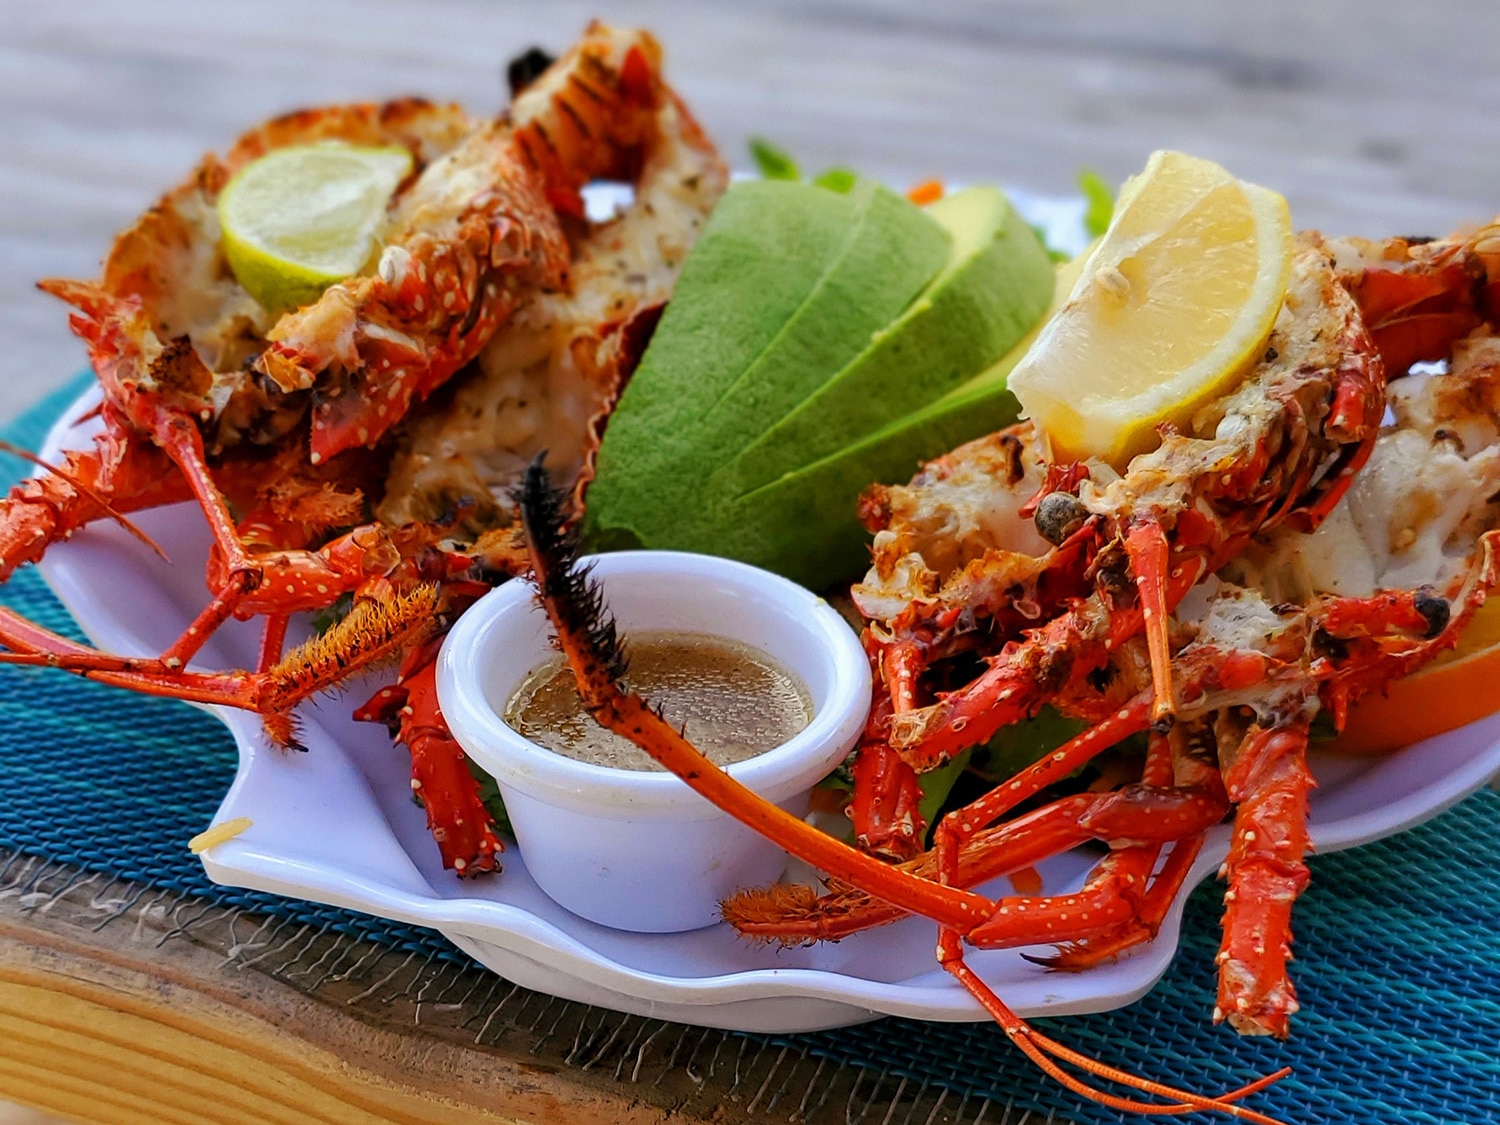 A delicious lobster dish served on Sandy Island in Anguilla.